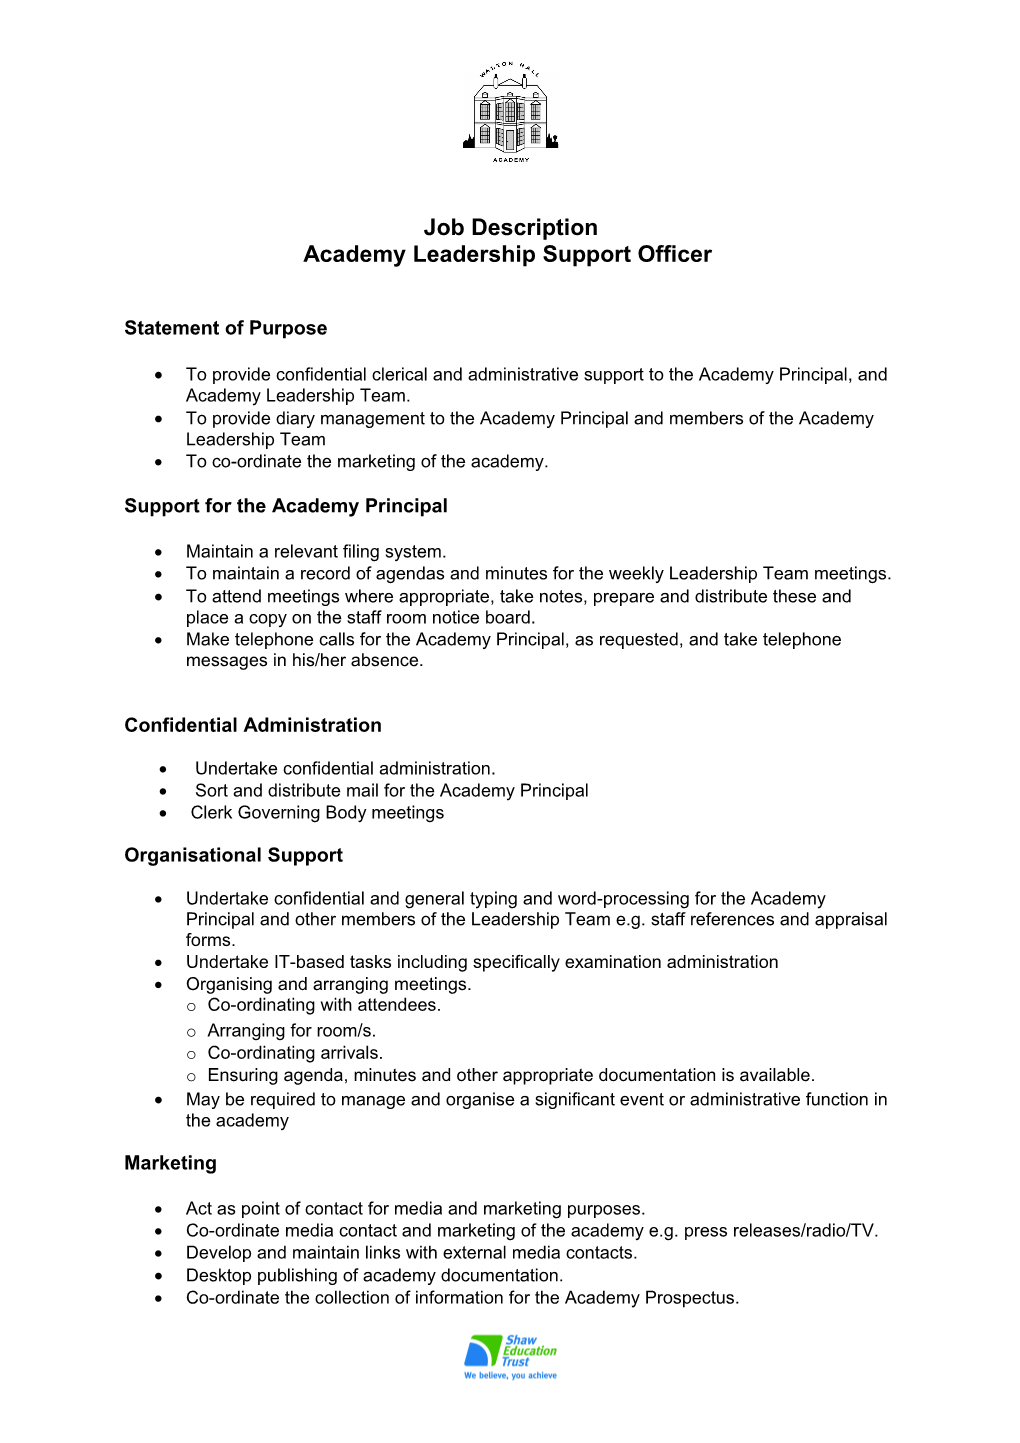 Academy Leadership Support Officer